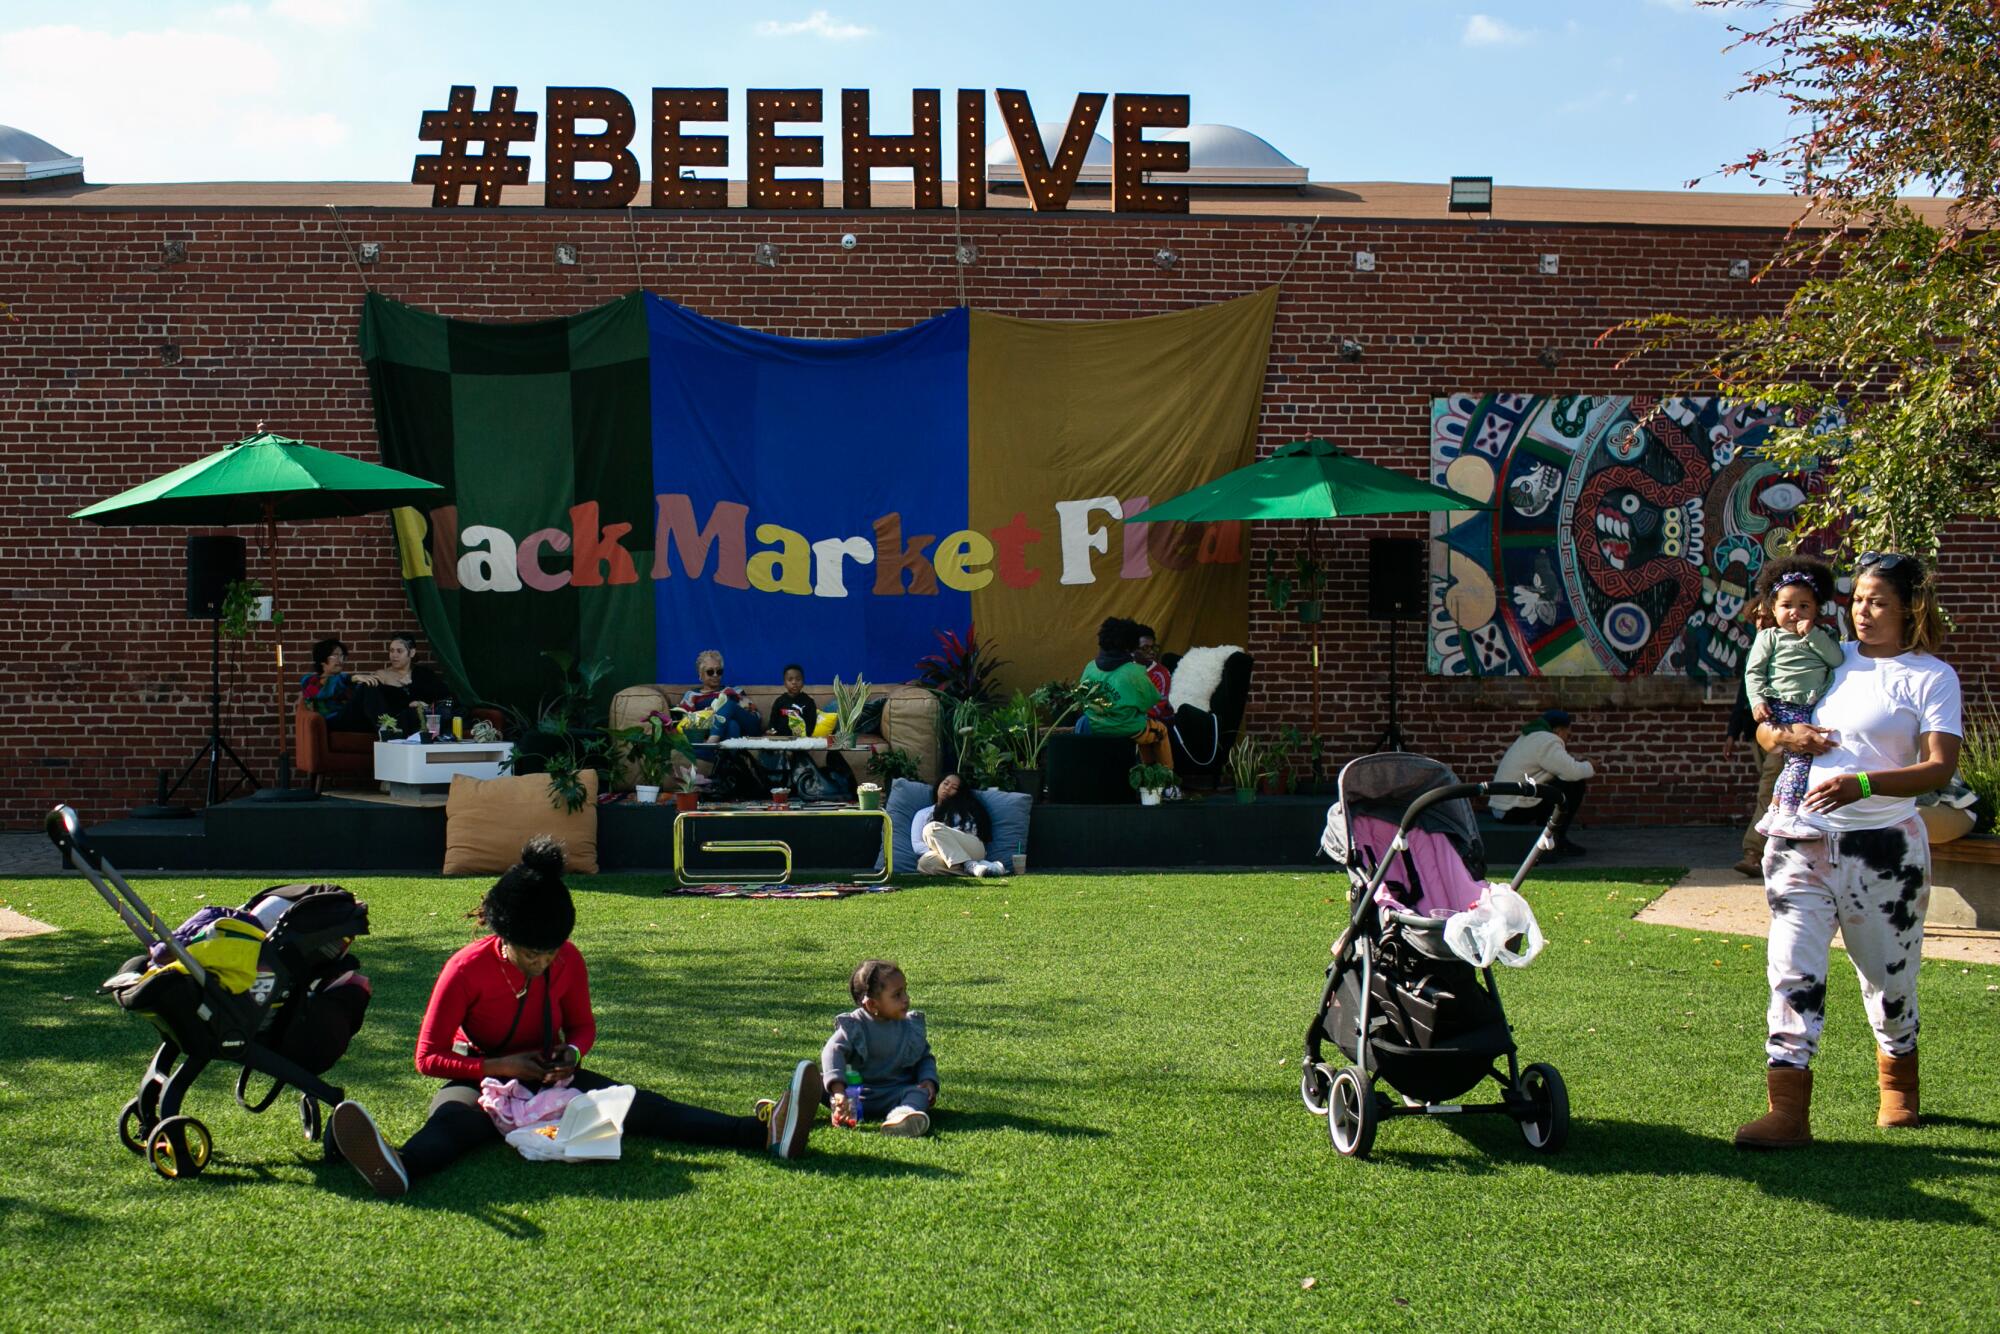 People sit on the lawn outside a building with signs that say "The Beehive" and "Black Market Flea"